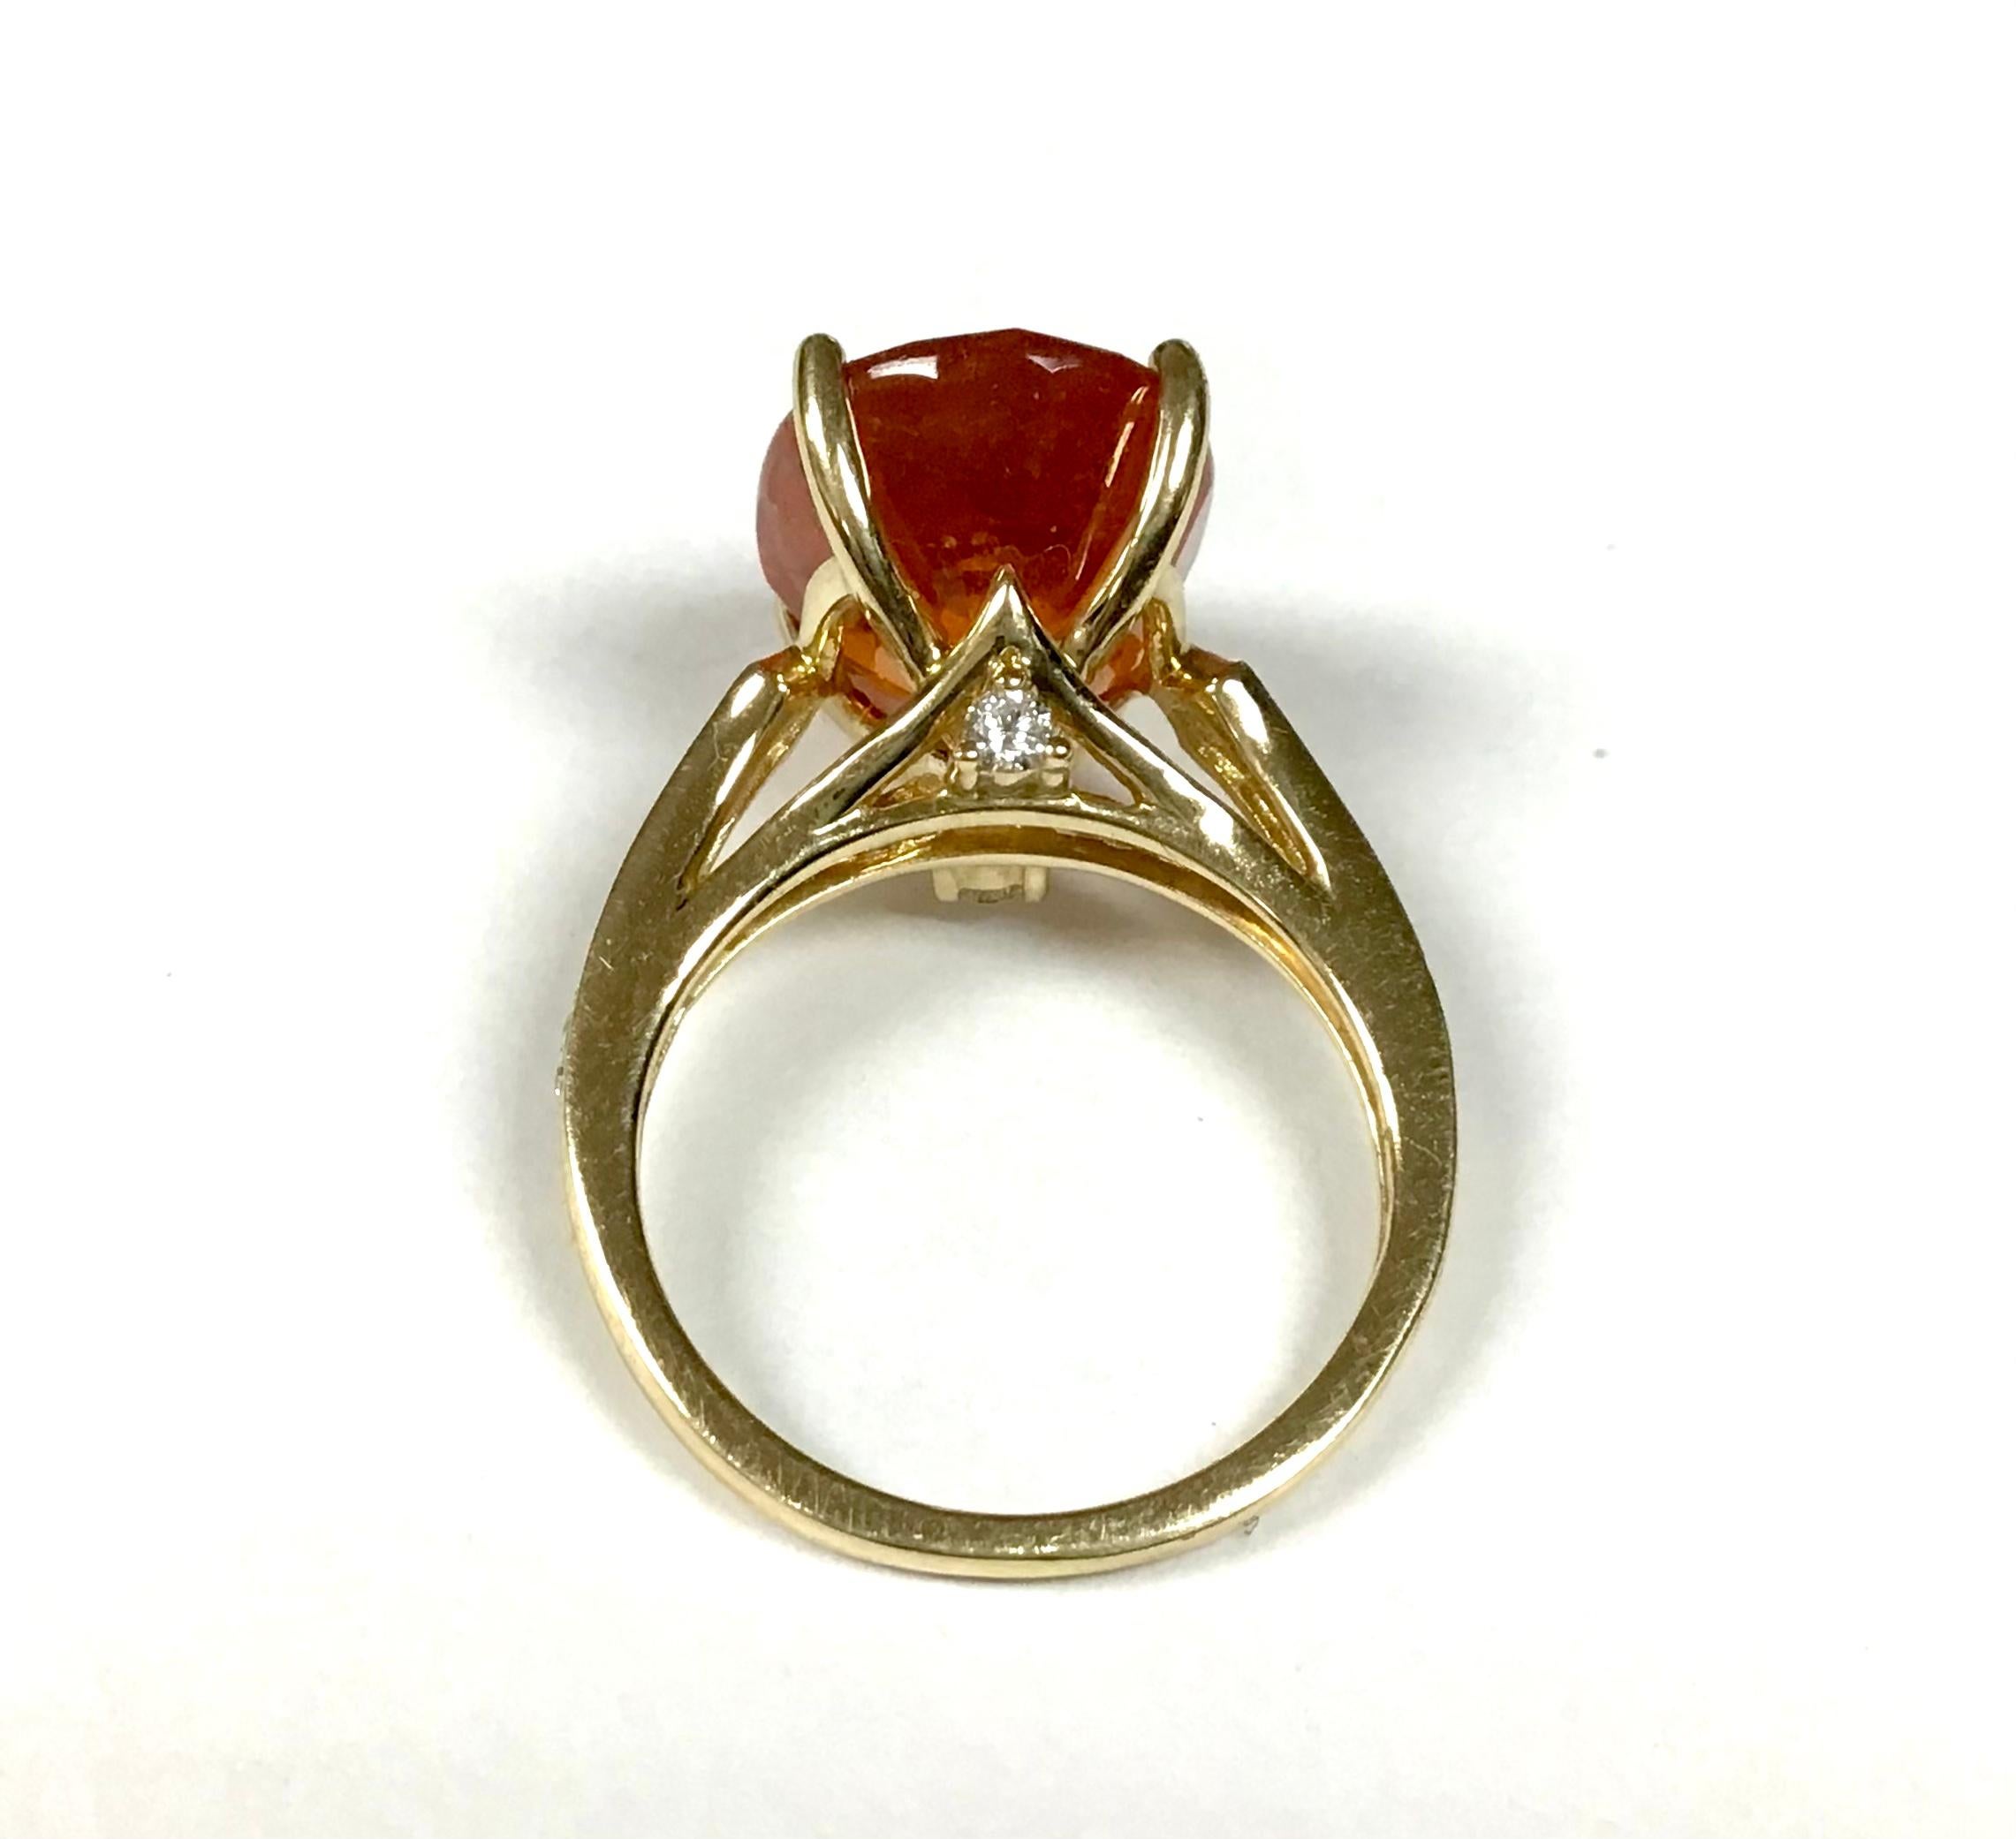  14K Yellow Gold Orange Sapphire With Diamond Ring. 
14k yellow gold oval orange sapphire and diamond ring. 5.14 Grams TW. The dimensions are approximately 
14mm x 9.5 mm. Approximately 5 carats. Approximate size 6